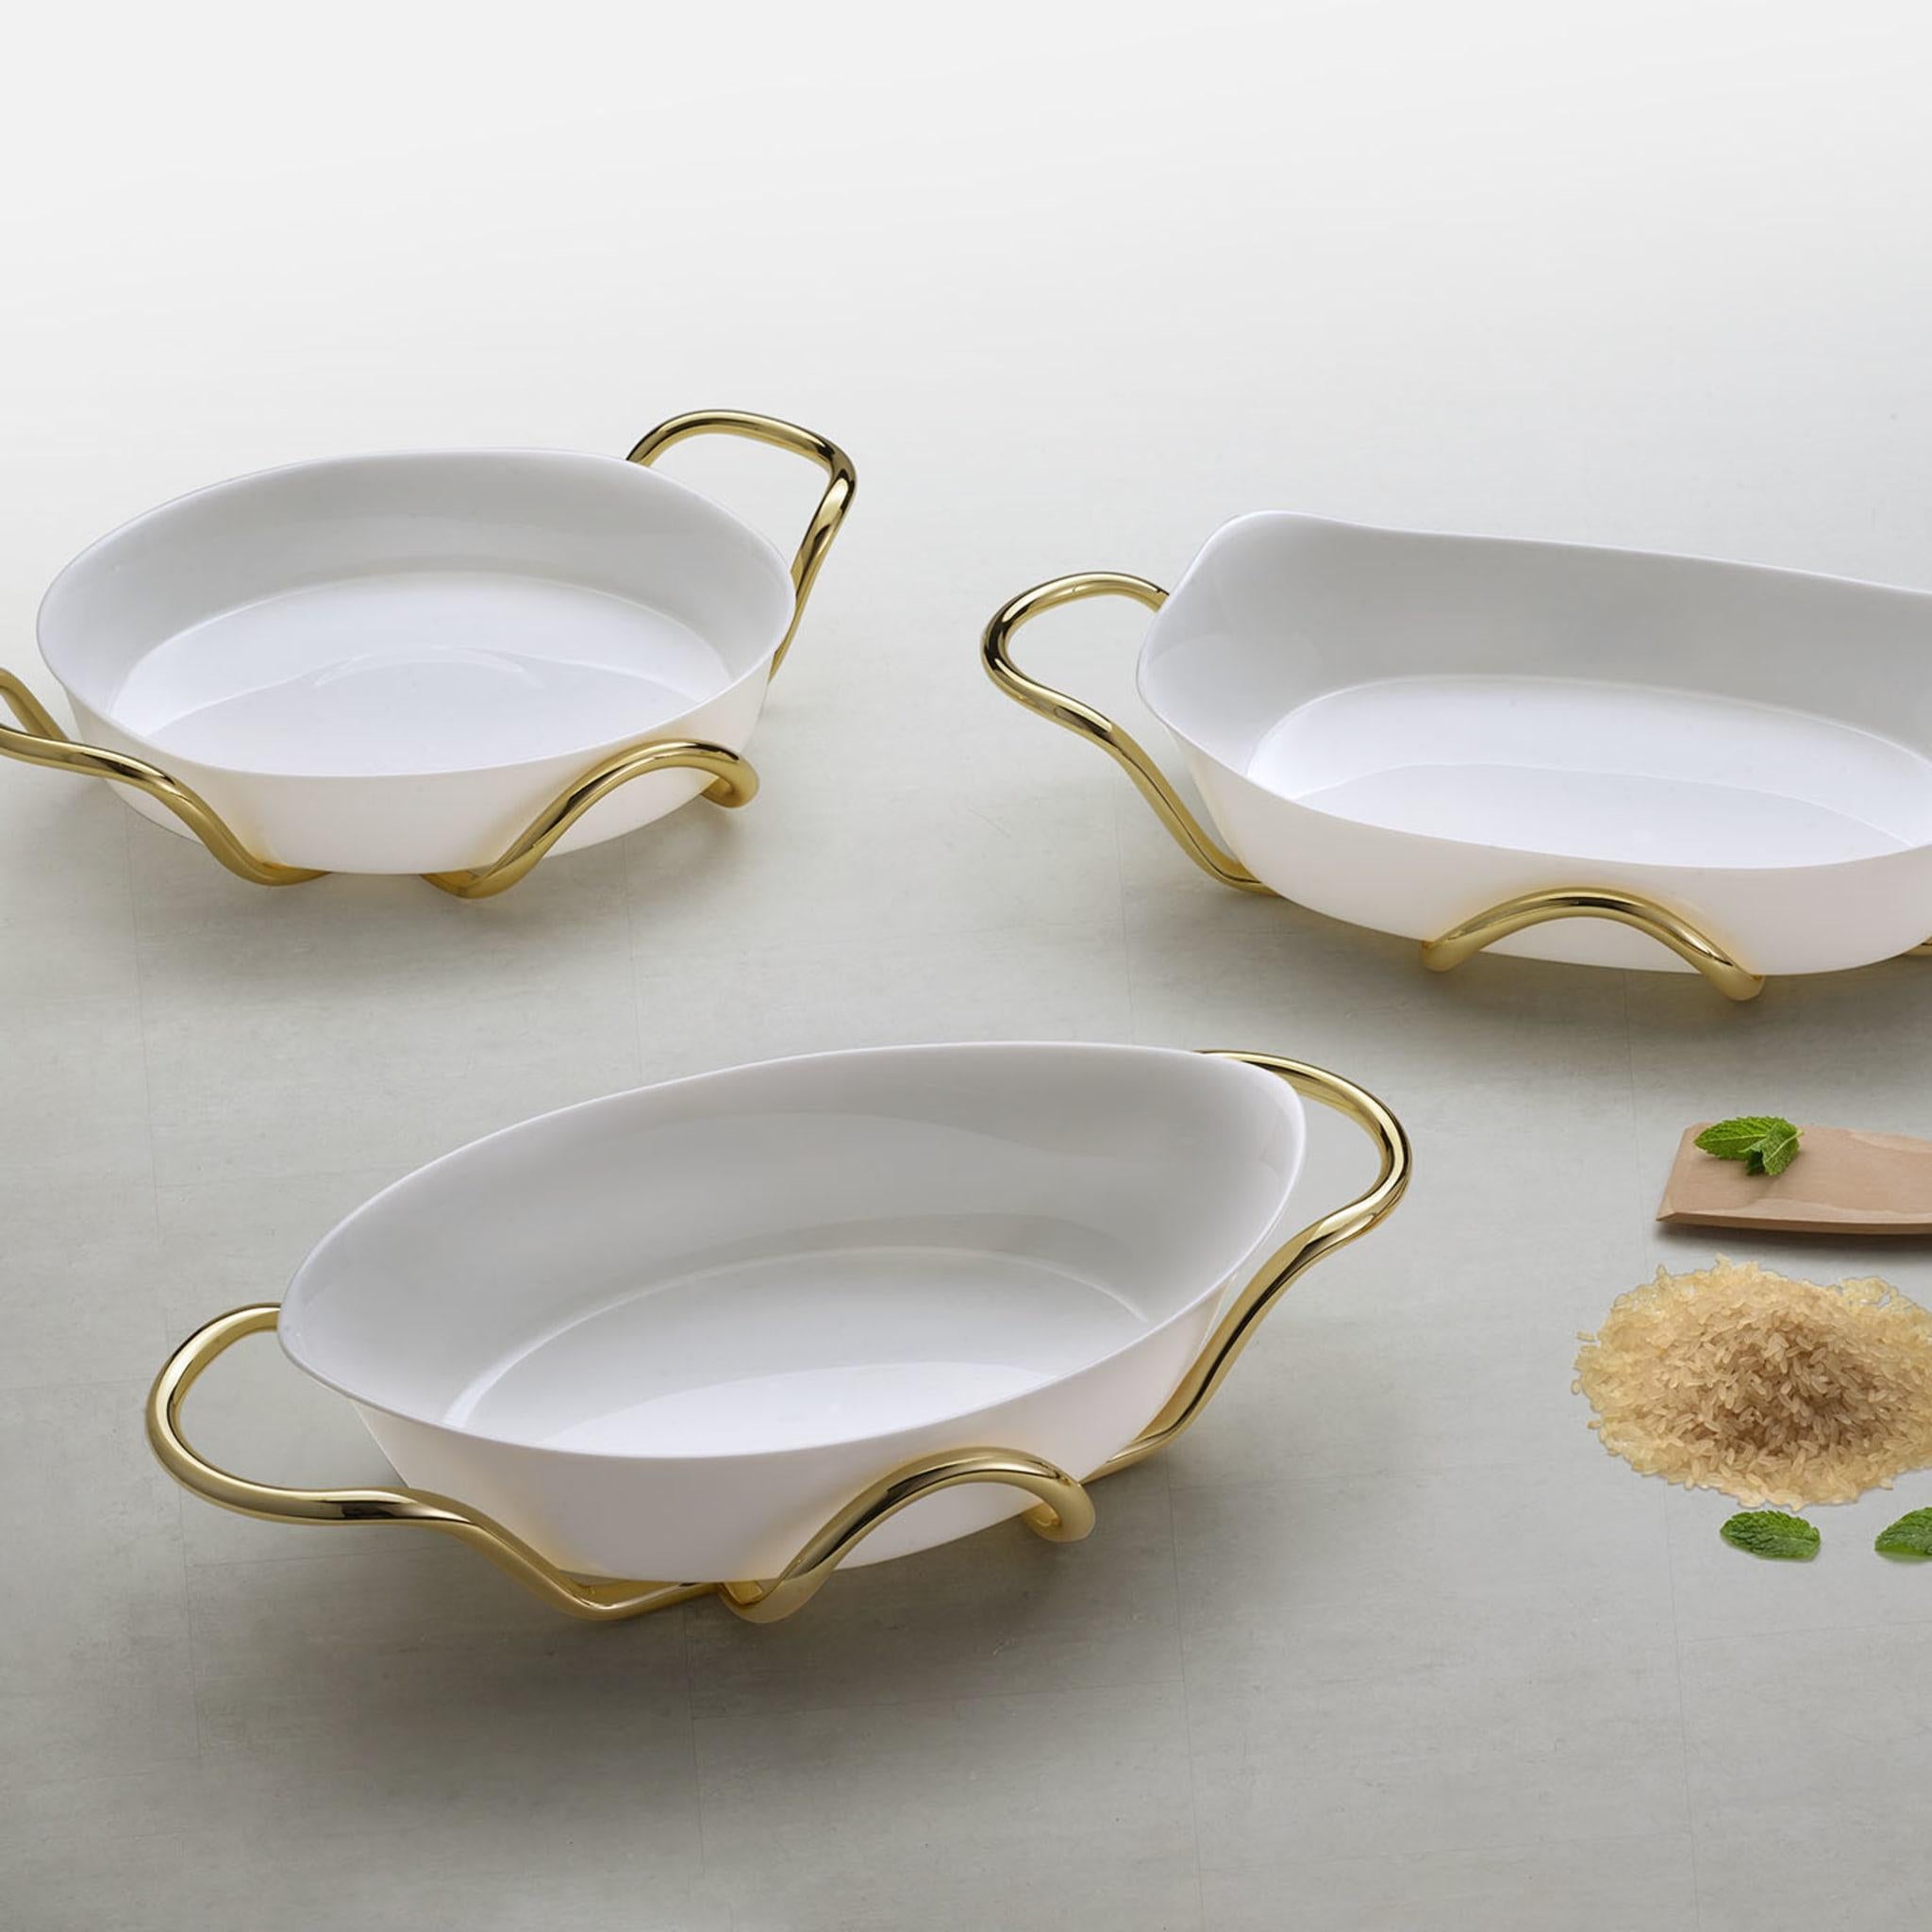 Plush and refined, this oval ceramic baking dish and its cylindrical sinuous-lined brass holder are superb for serving hot food with unprecedented elegance without direct contact with the table. A gleaming golden finish enriches the structure, which